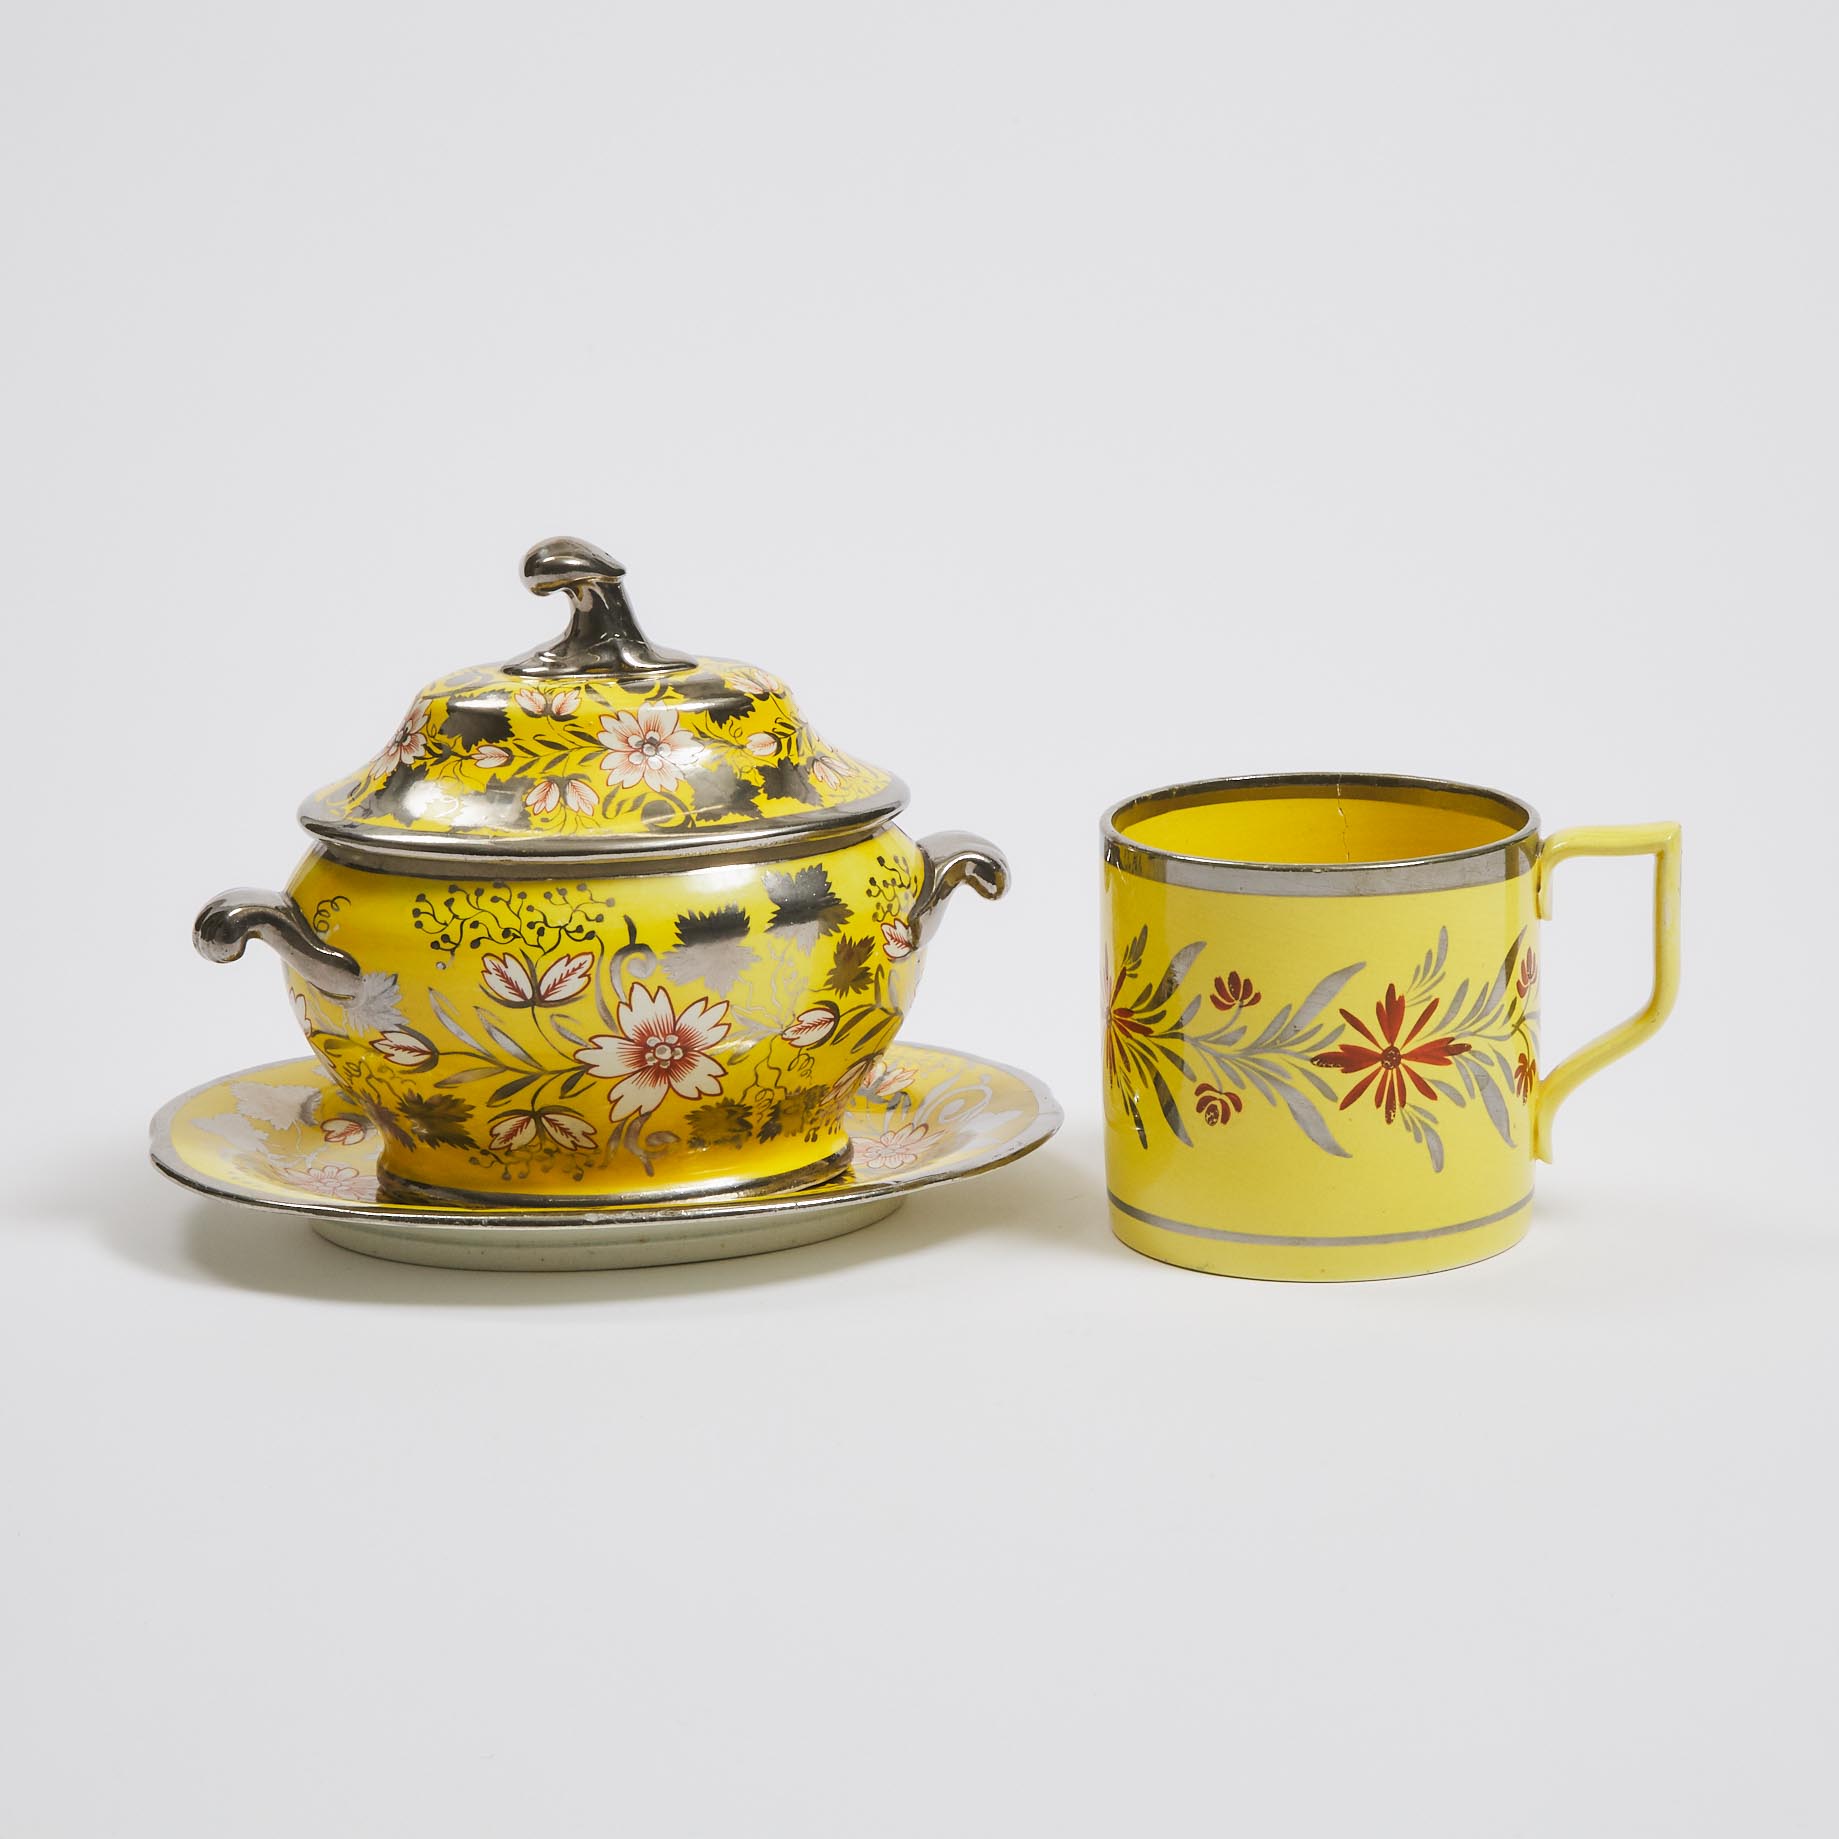 English Yellow-Ground Silver Lustre Covered Sauce Tureen with Stand, and a Cylindrical Mug, c.1830